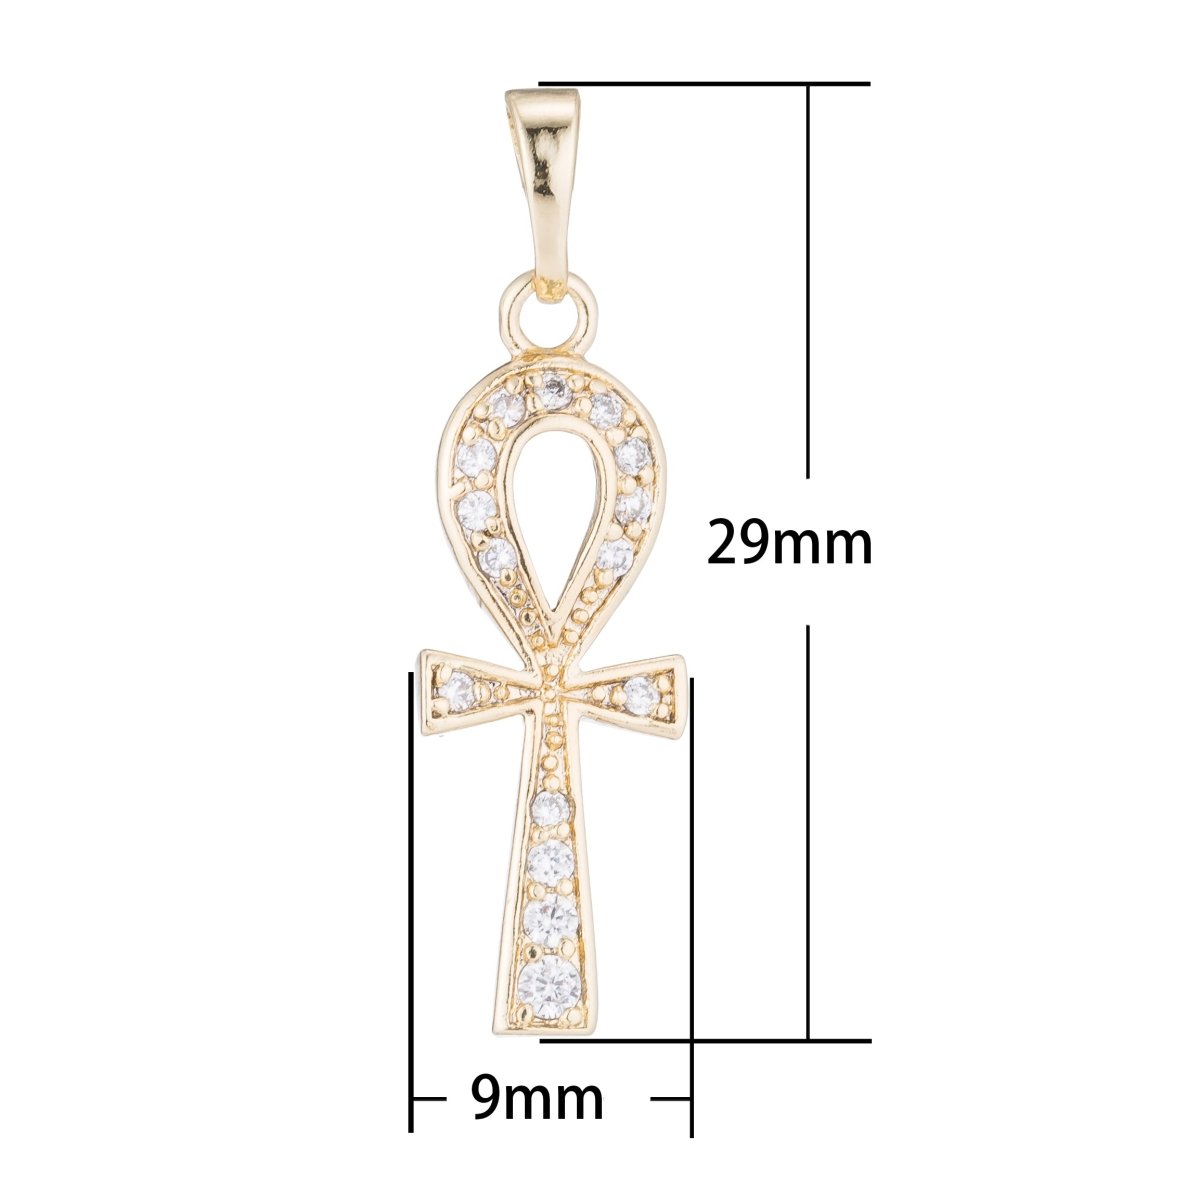 18K Gold Filled Ankh Cross, Key of Life, Symbol of Life, Egyptian Pantheon, Crux Ansata, Cubic Zirconia Necklace Pendant Charm Bead Bails for Jewelry Making H-681 - DLUXCA